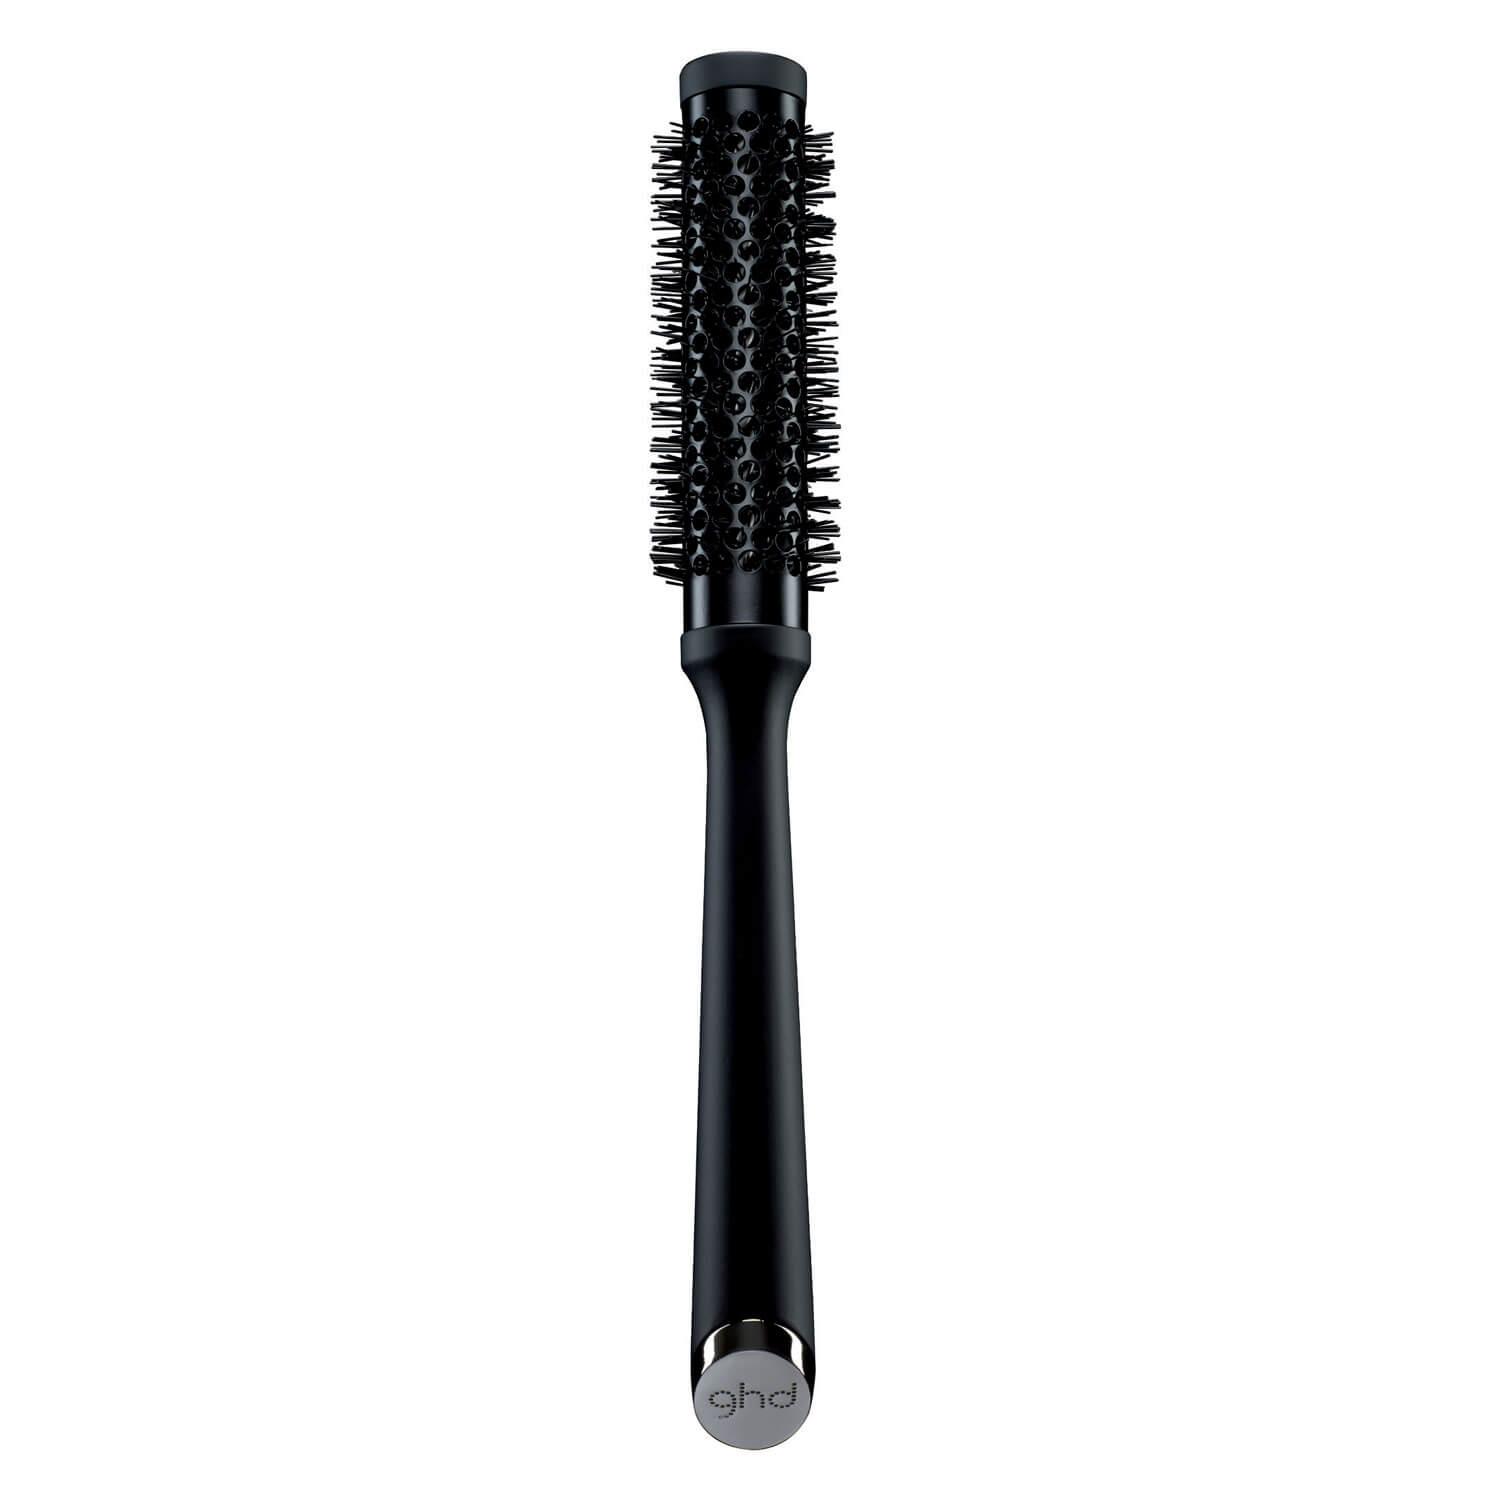 ghd Brushes - The Blow Dryer Radial Brush 1